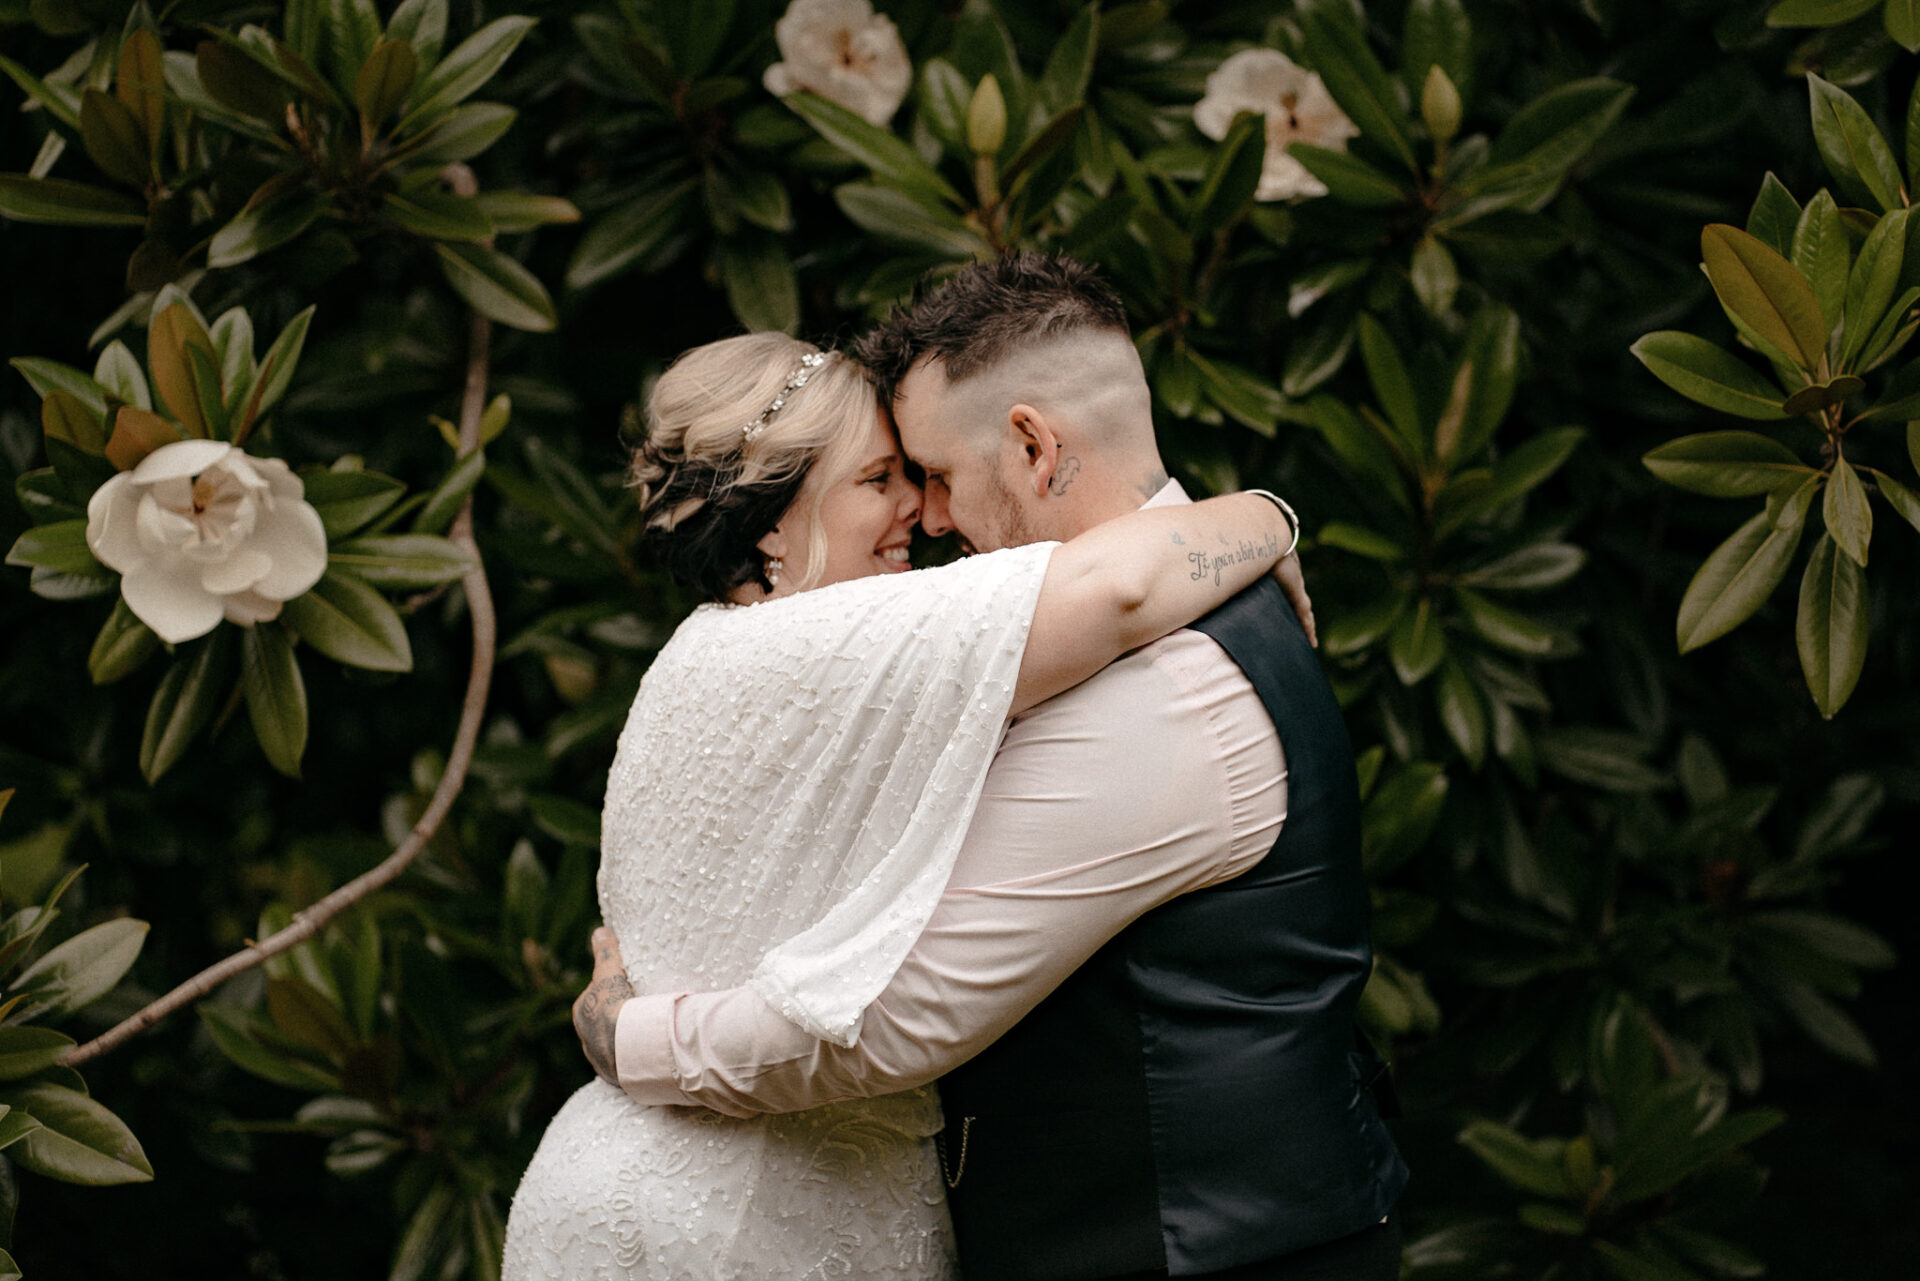 A journal documenting recent wedding stories captures a beautiful moment of a bride and groom hugging in front of bushes.